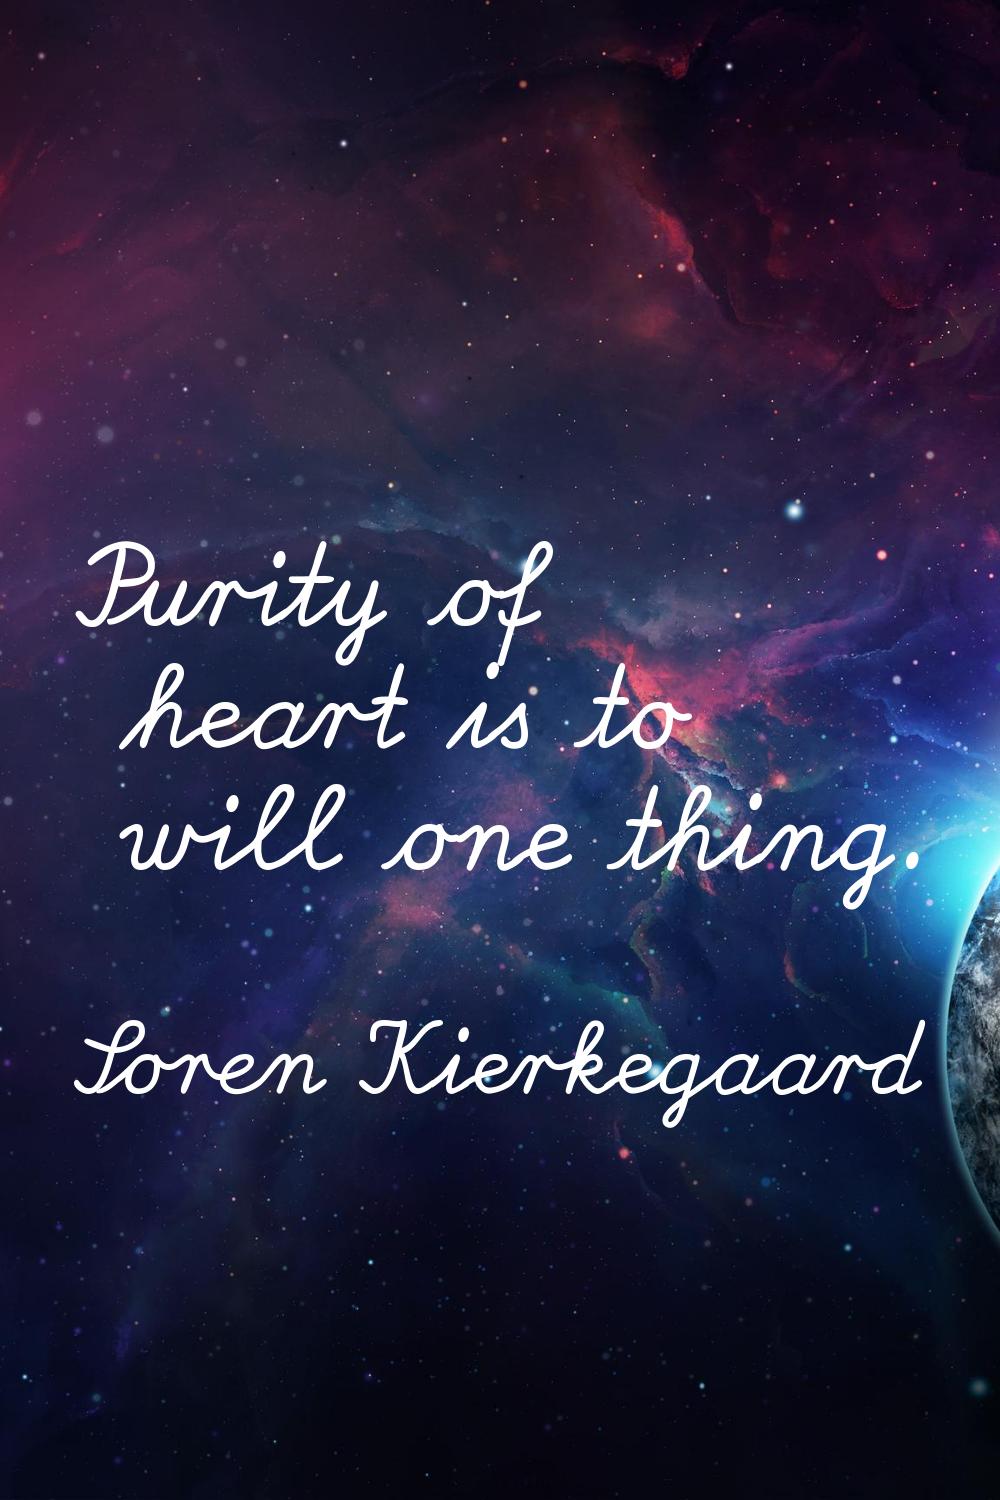 Purity of heart is to will one thing.